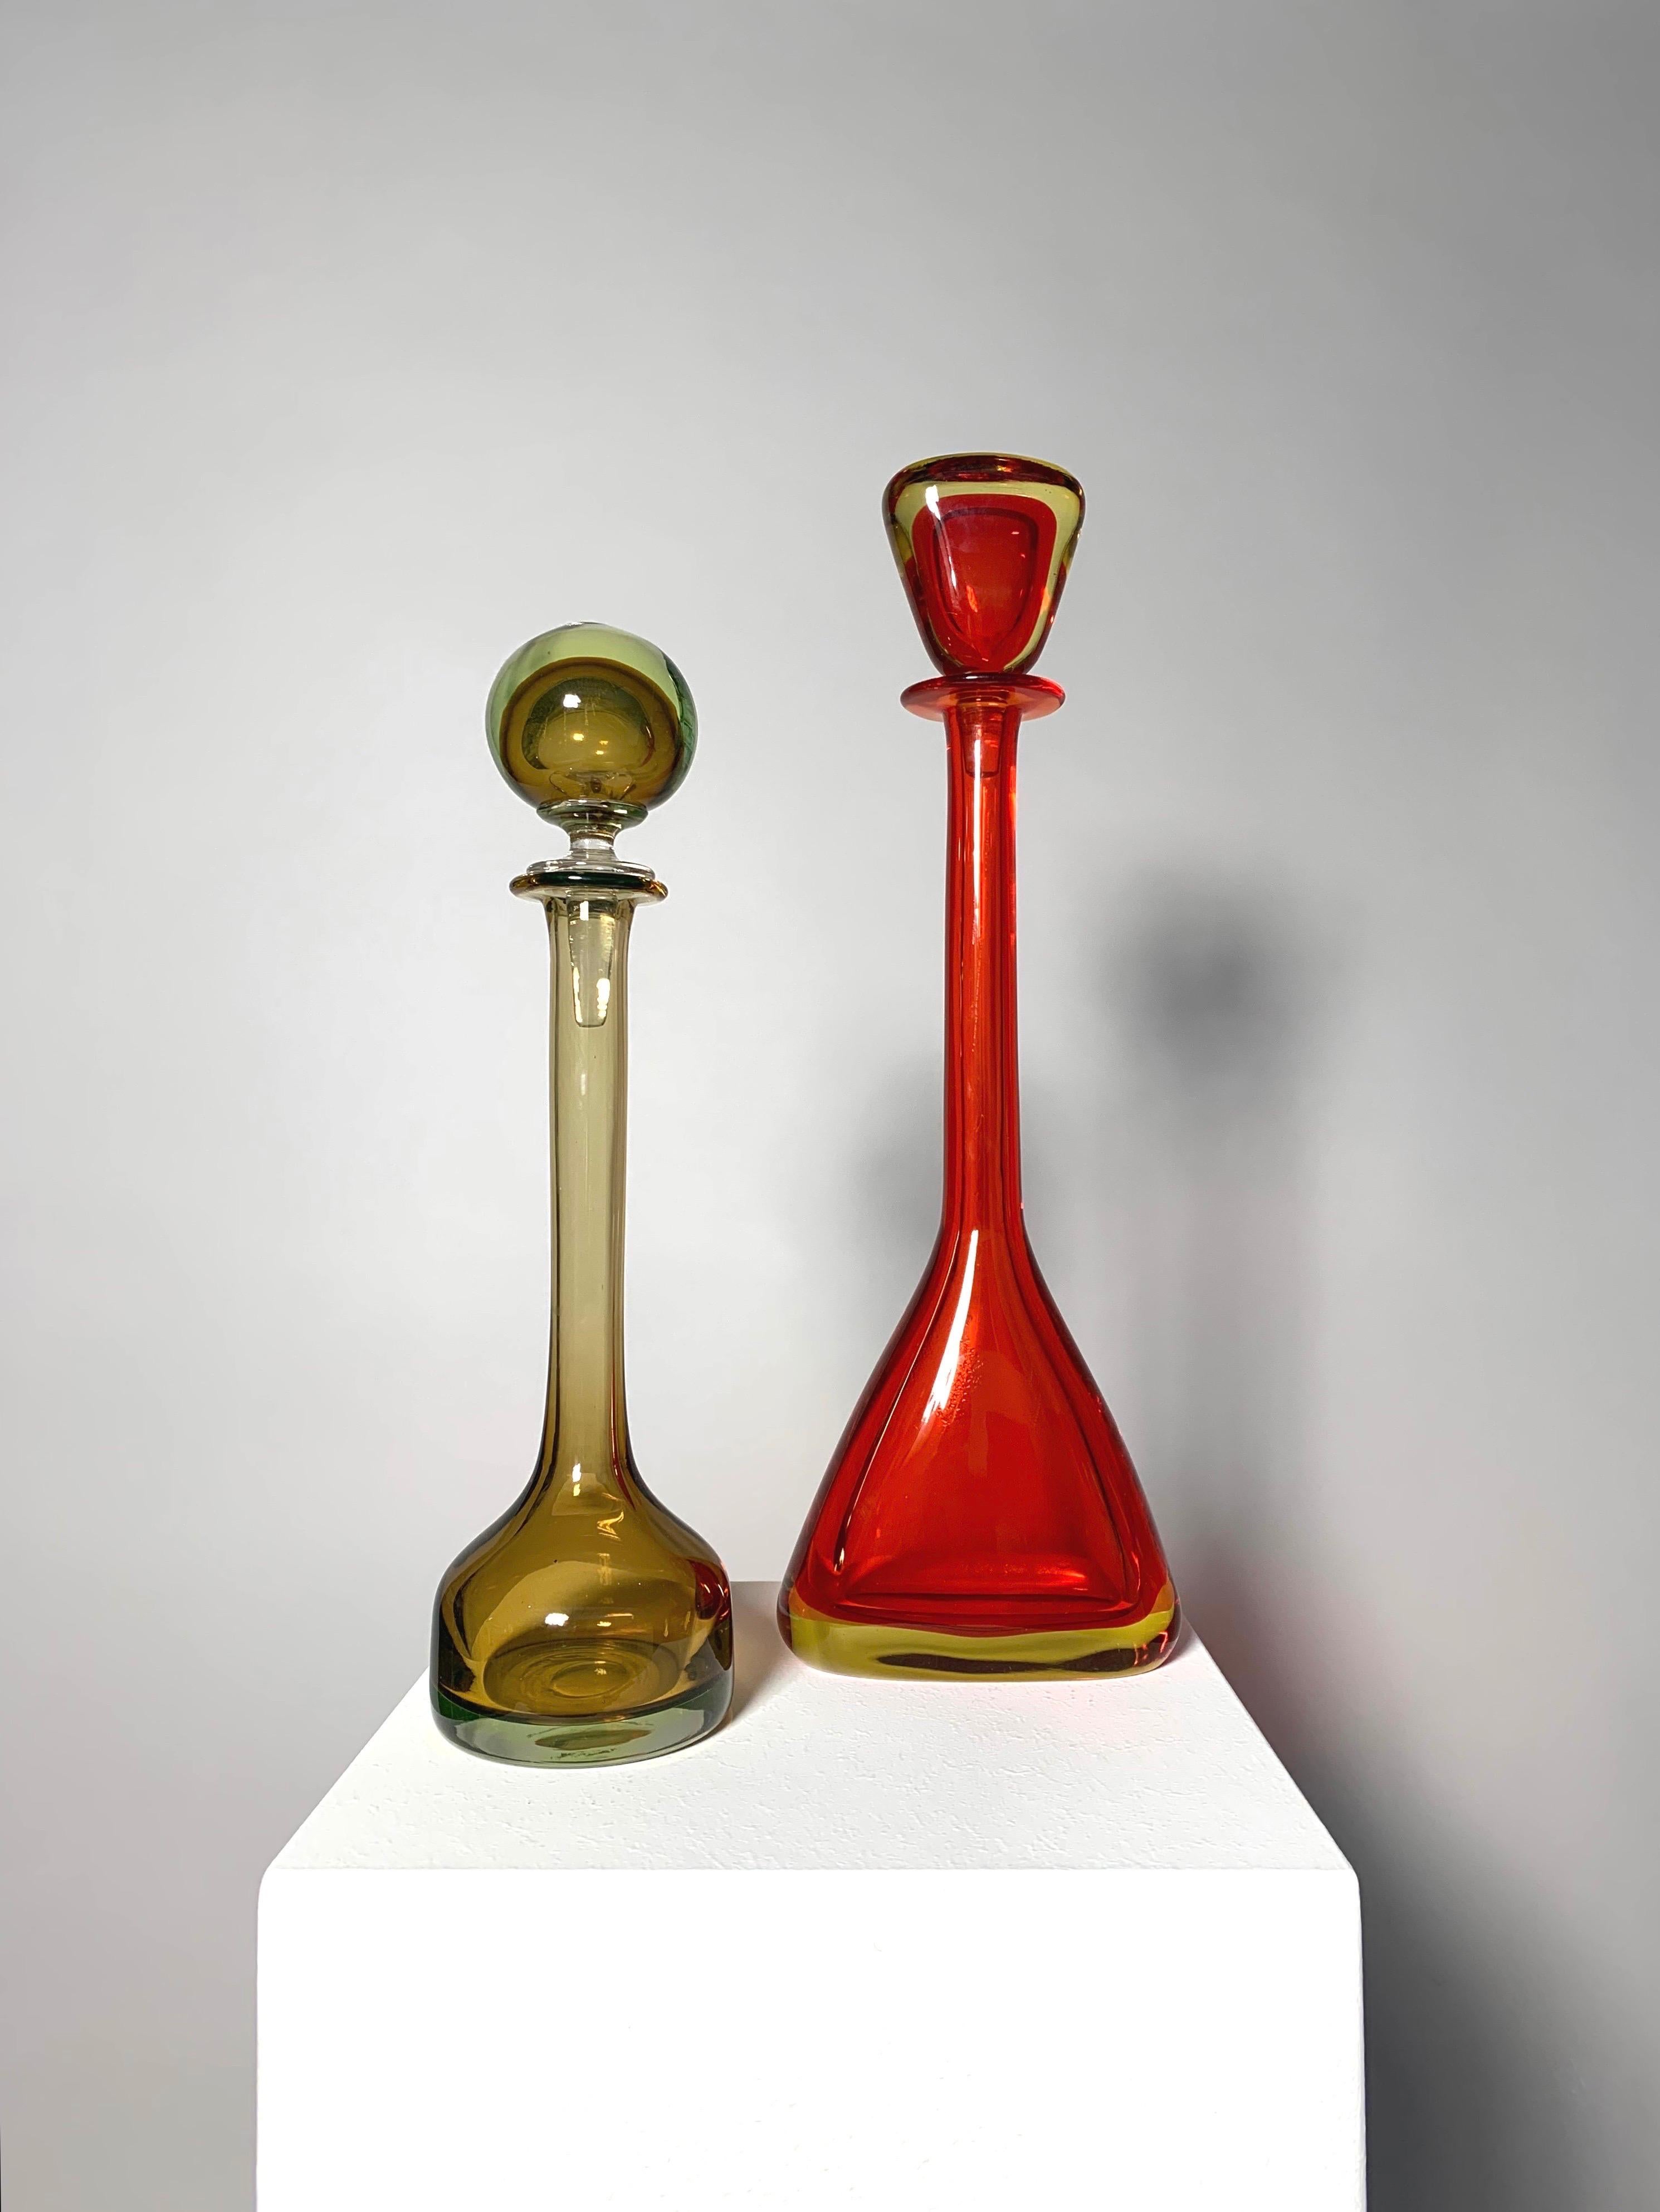 Rare pair of large Flavio Poli bottles for Seguso Vetri d‘Arte, designed around 1962-1963, mouth-blown and hand-shaped in Sommerso glass.

Red bottle is 46 cm tall
Yellow-brown bottle is 39 cm tall.